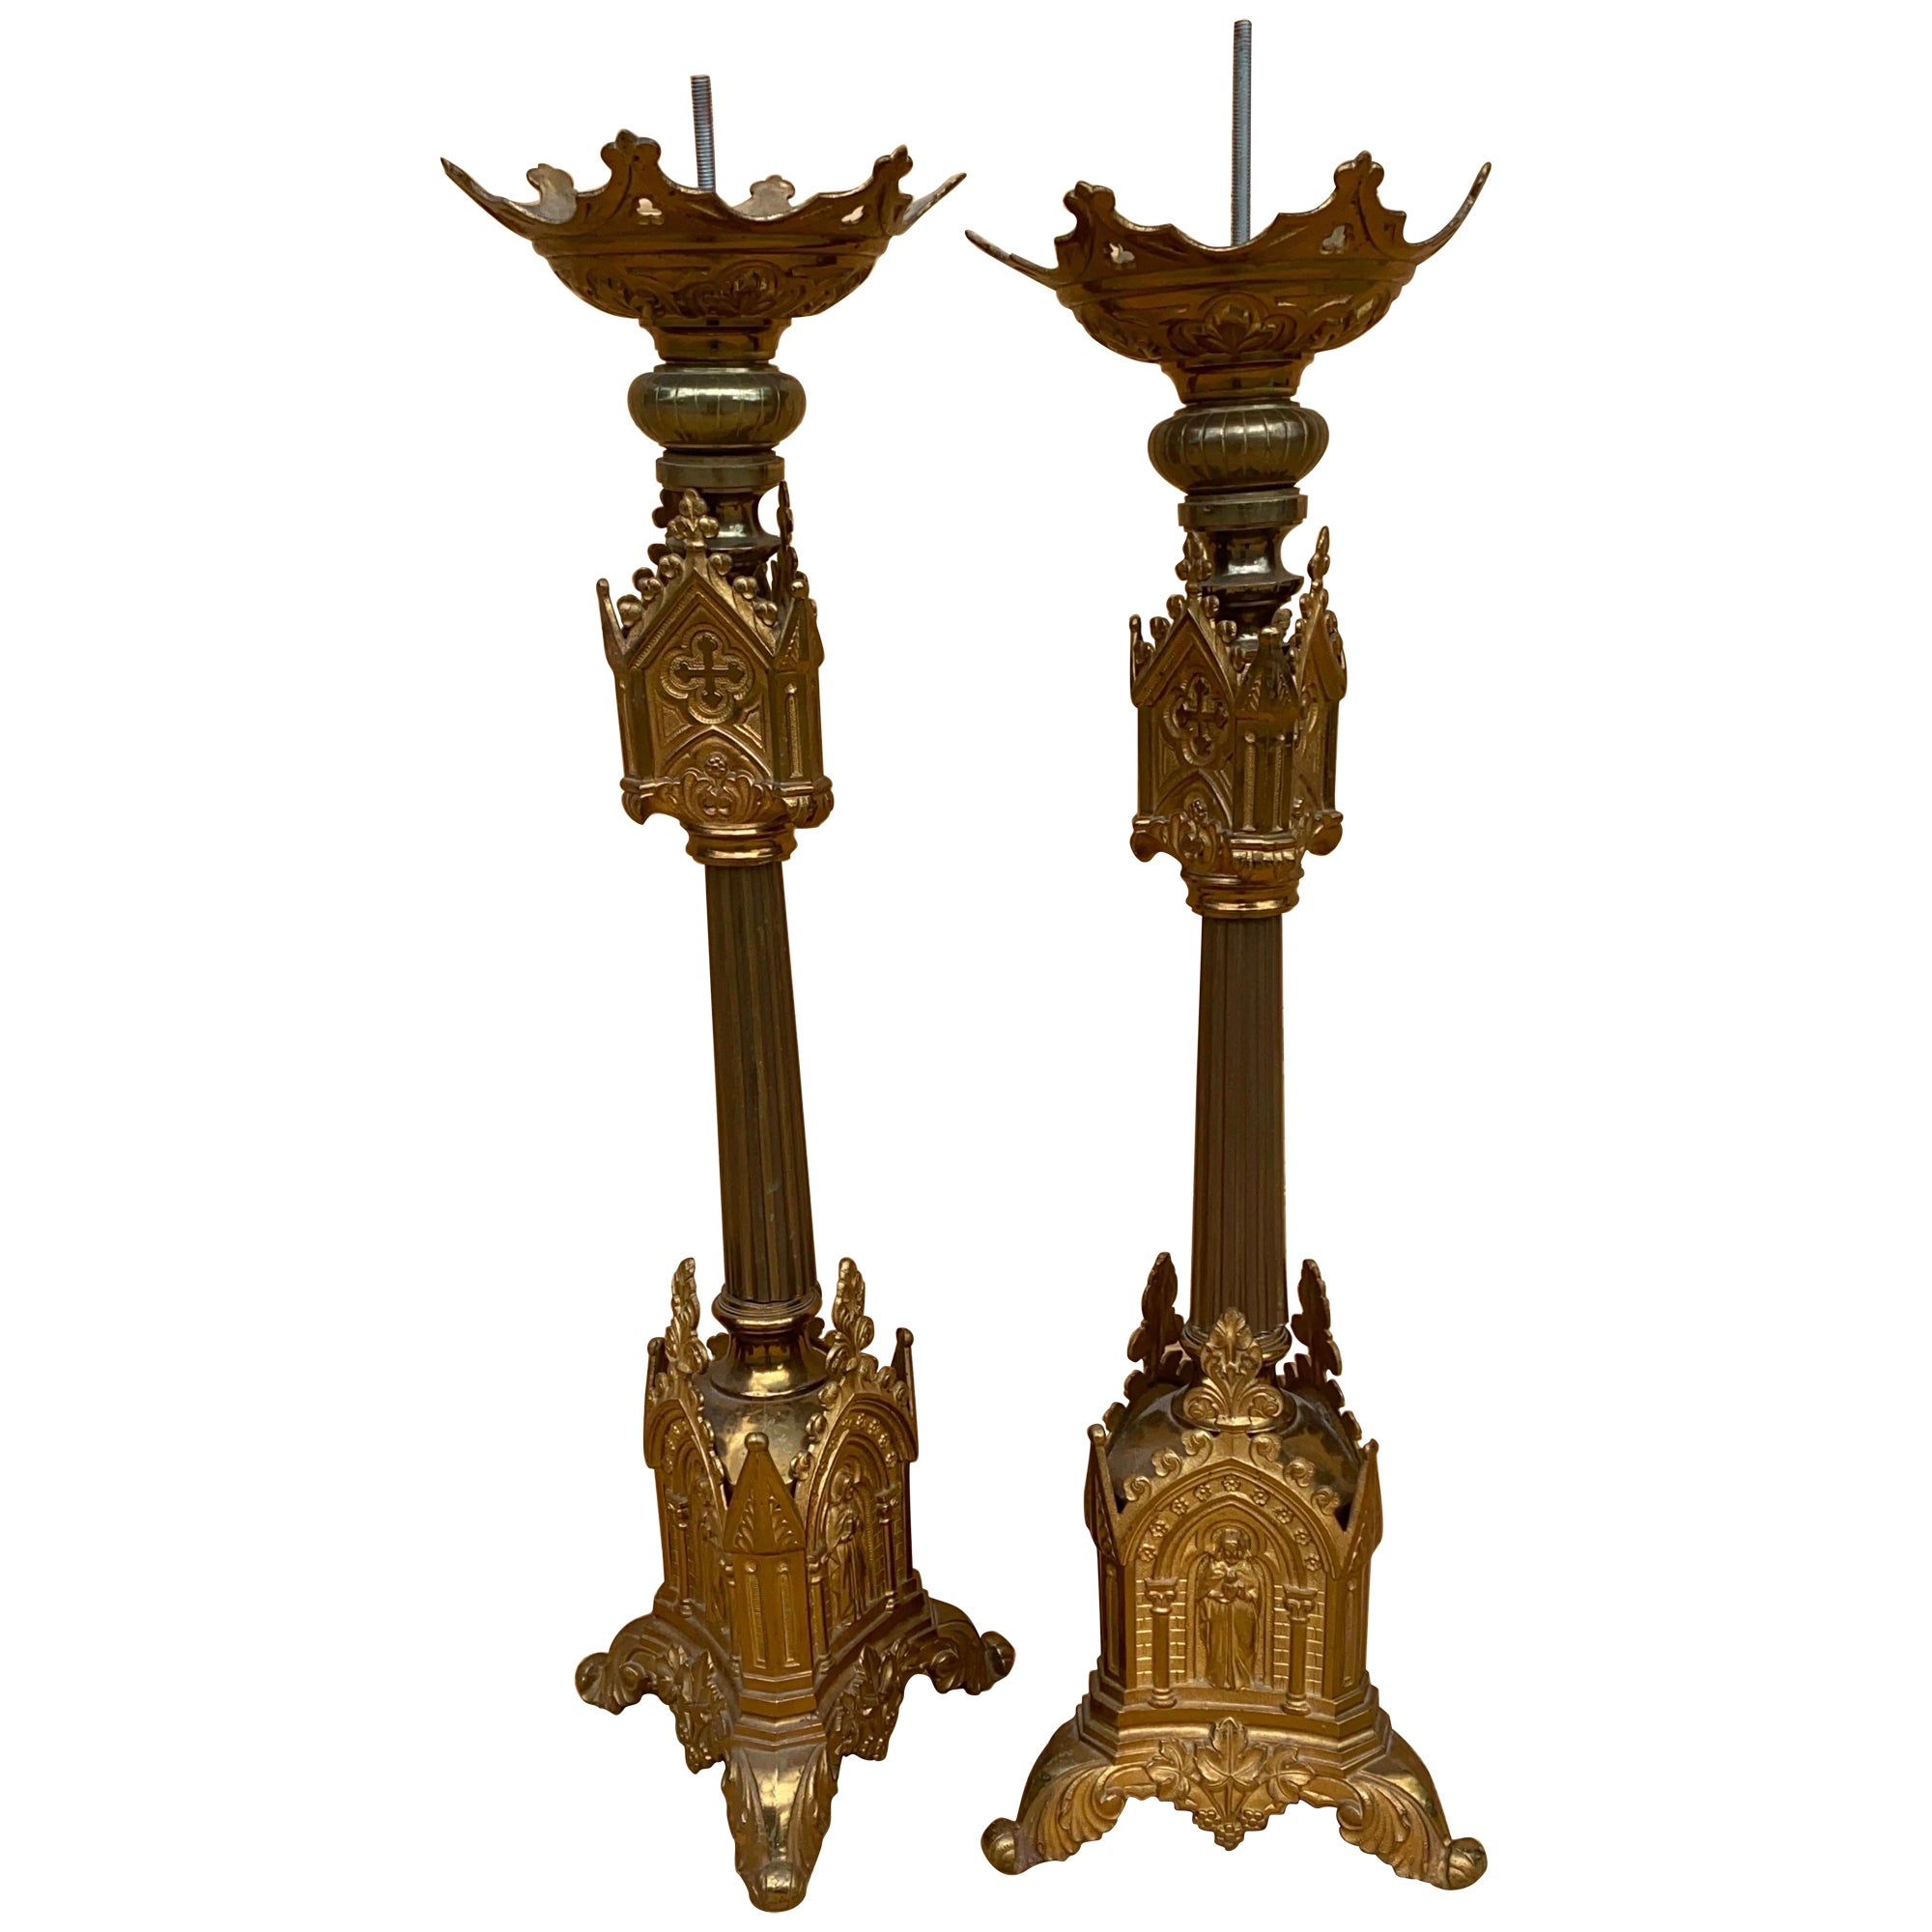 Antique French Neogothic Altar Torchère Candlestick Set w/ Jesus & Cross For Sale